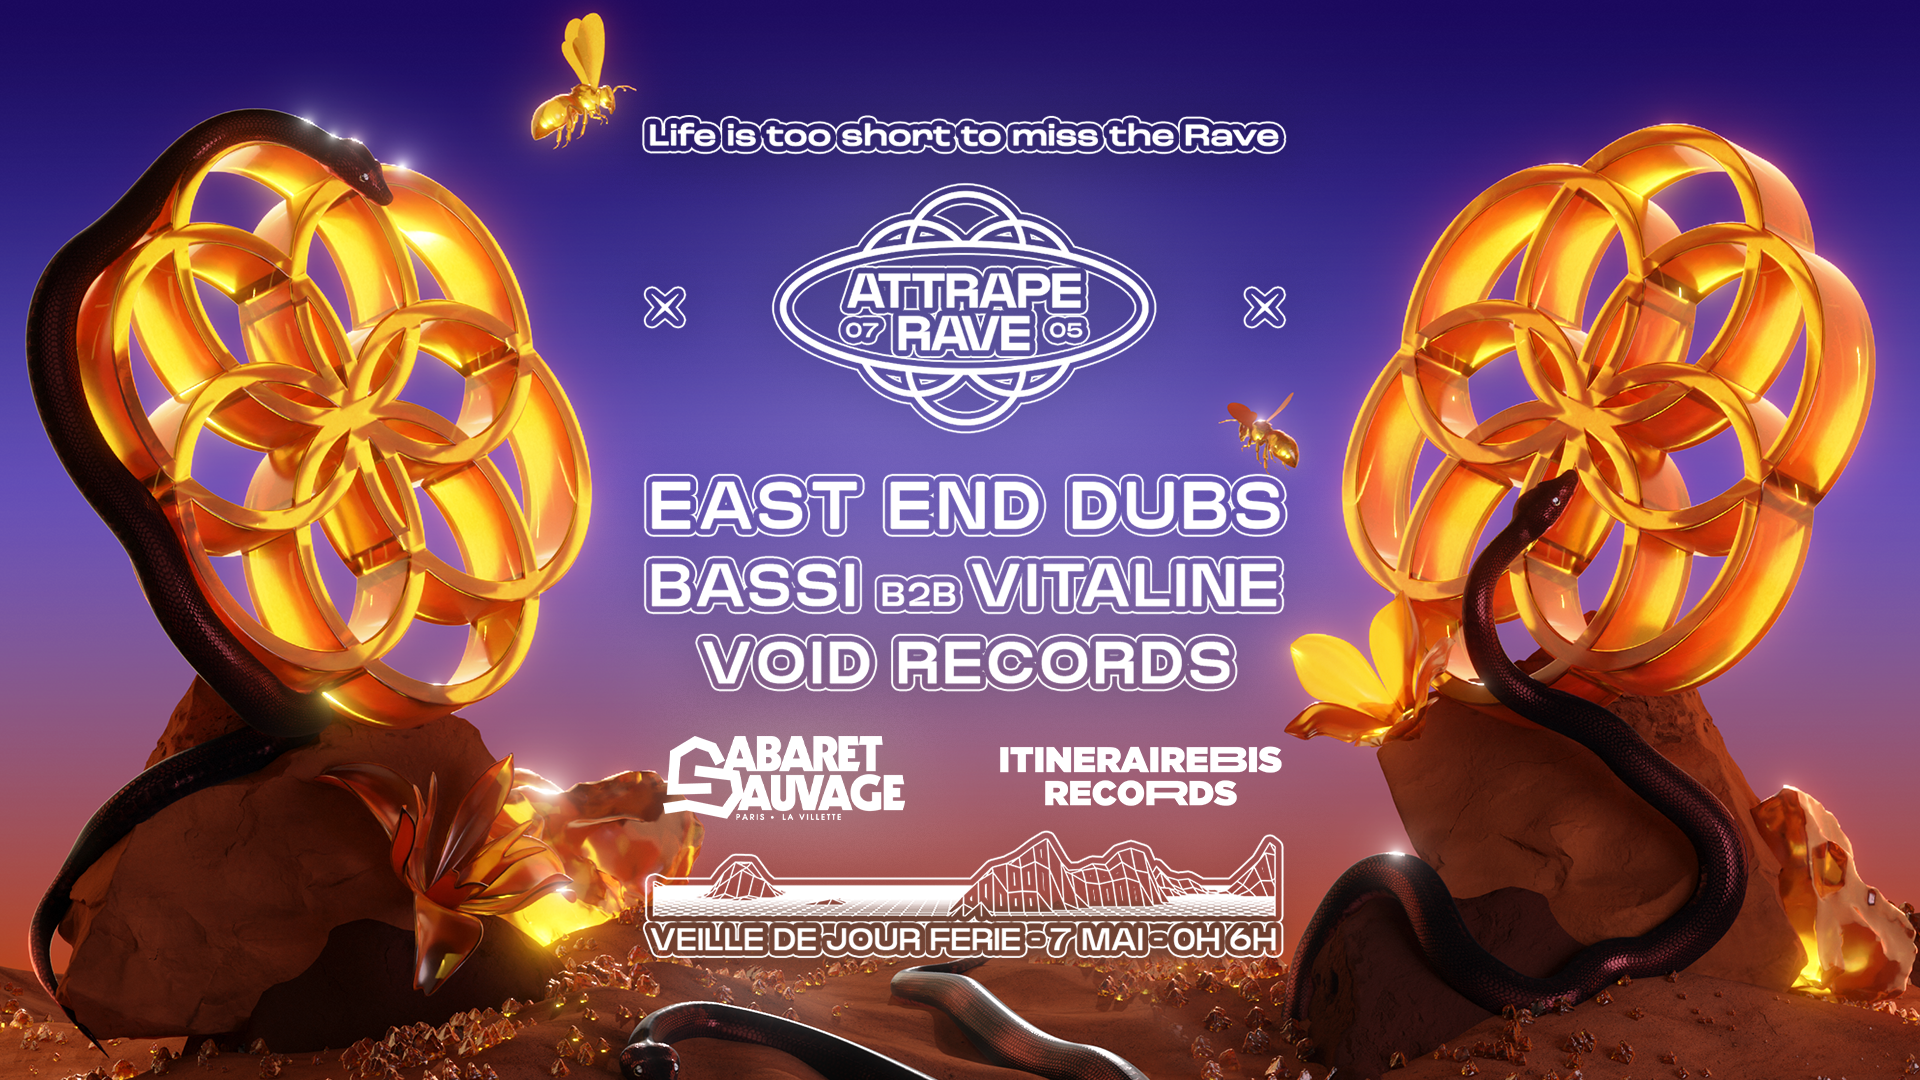 ATTRAPE RAVE SAUVAGE I East End Dubs, Vitaline, BASSI, VOID RECORDS - フライヤー裏